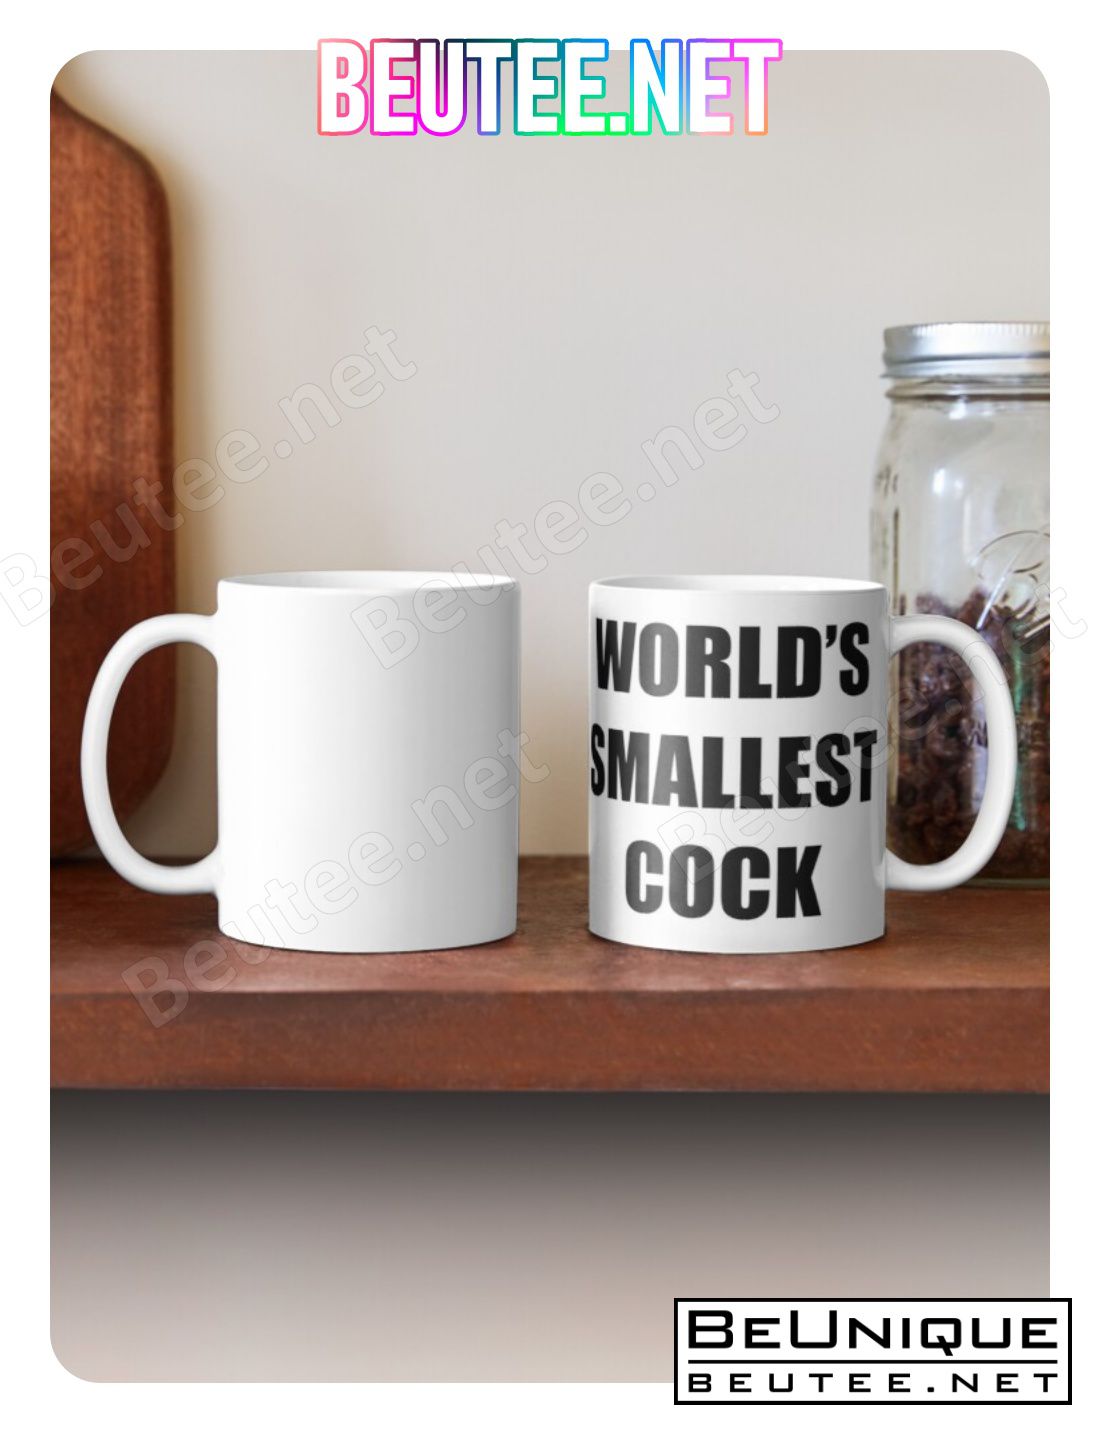 Worlds Smallest Cock Gifts - Funny Gag Gift Ideas For Bachelor Party From The Night Before - Great Best Friend Presents For Groom & Groomsmen Coffee Mug